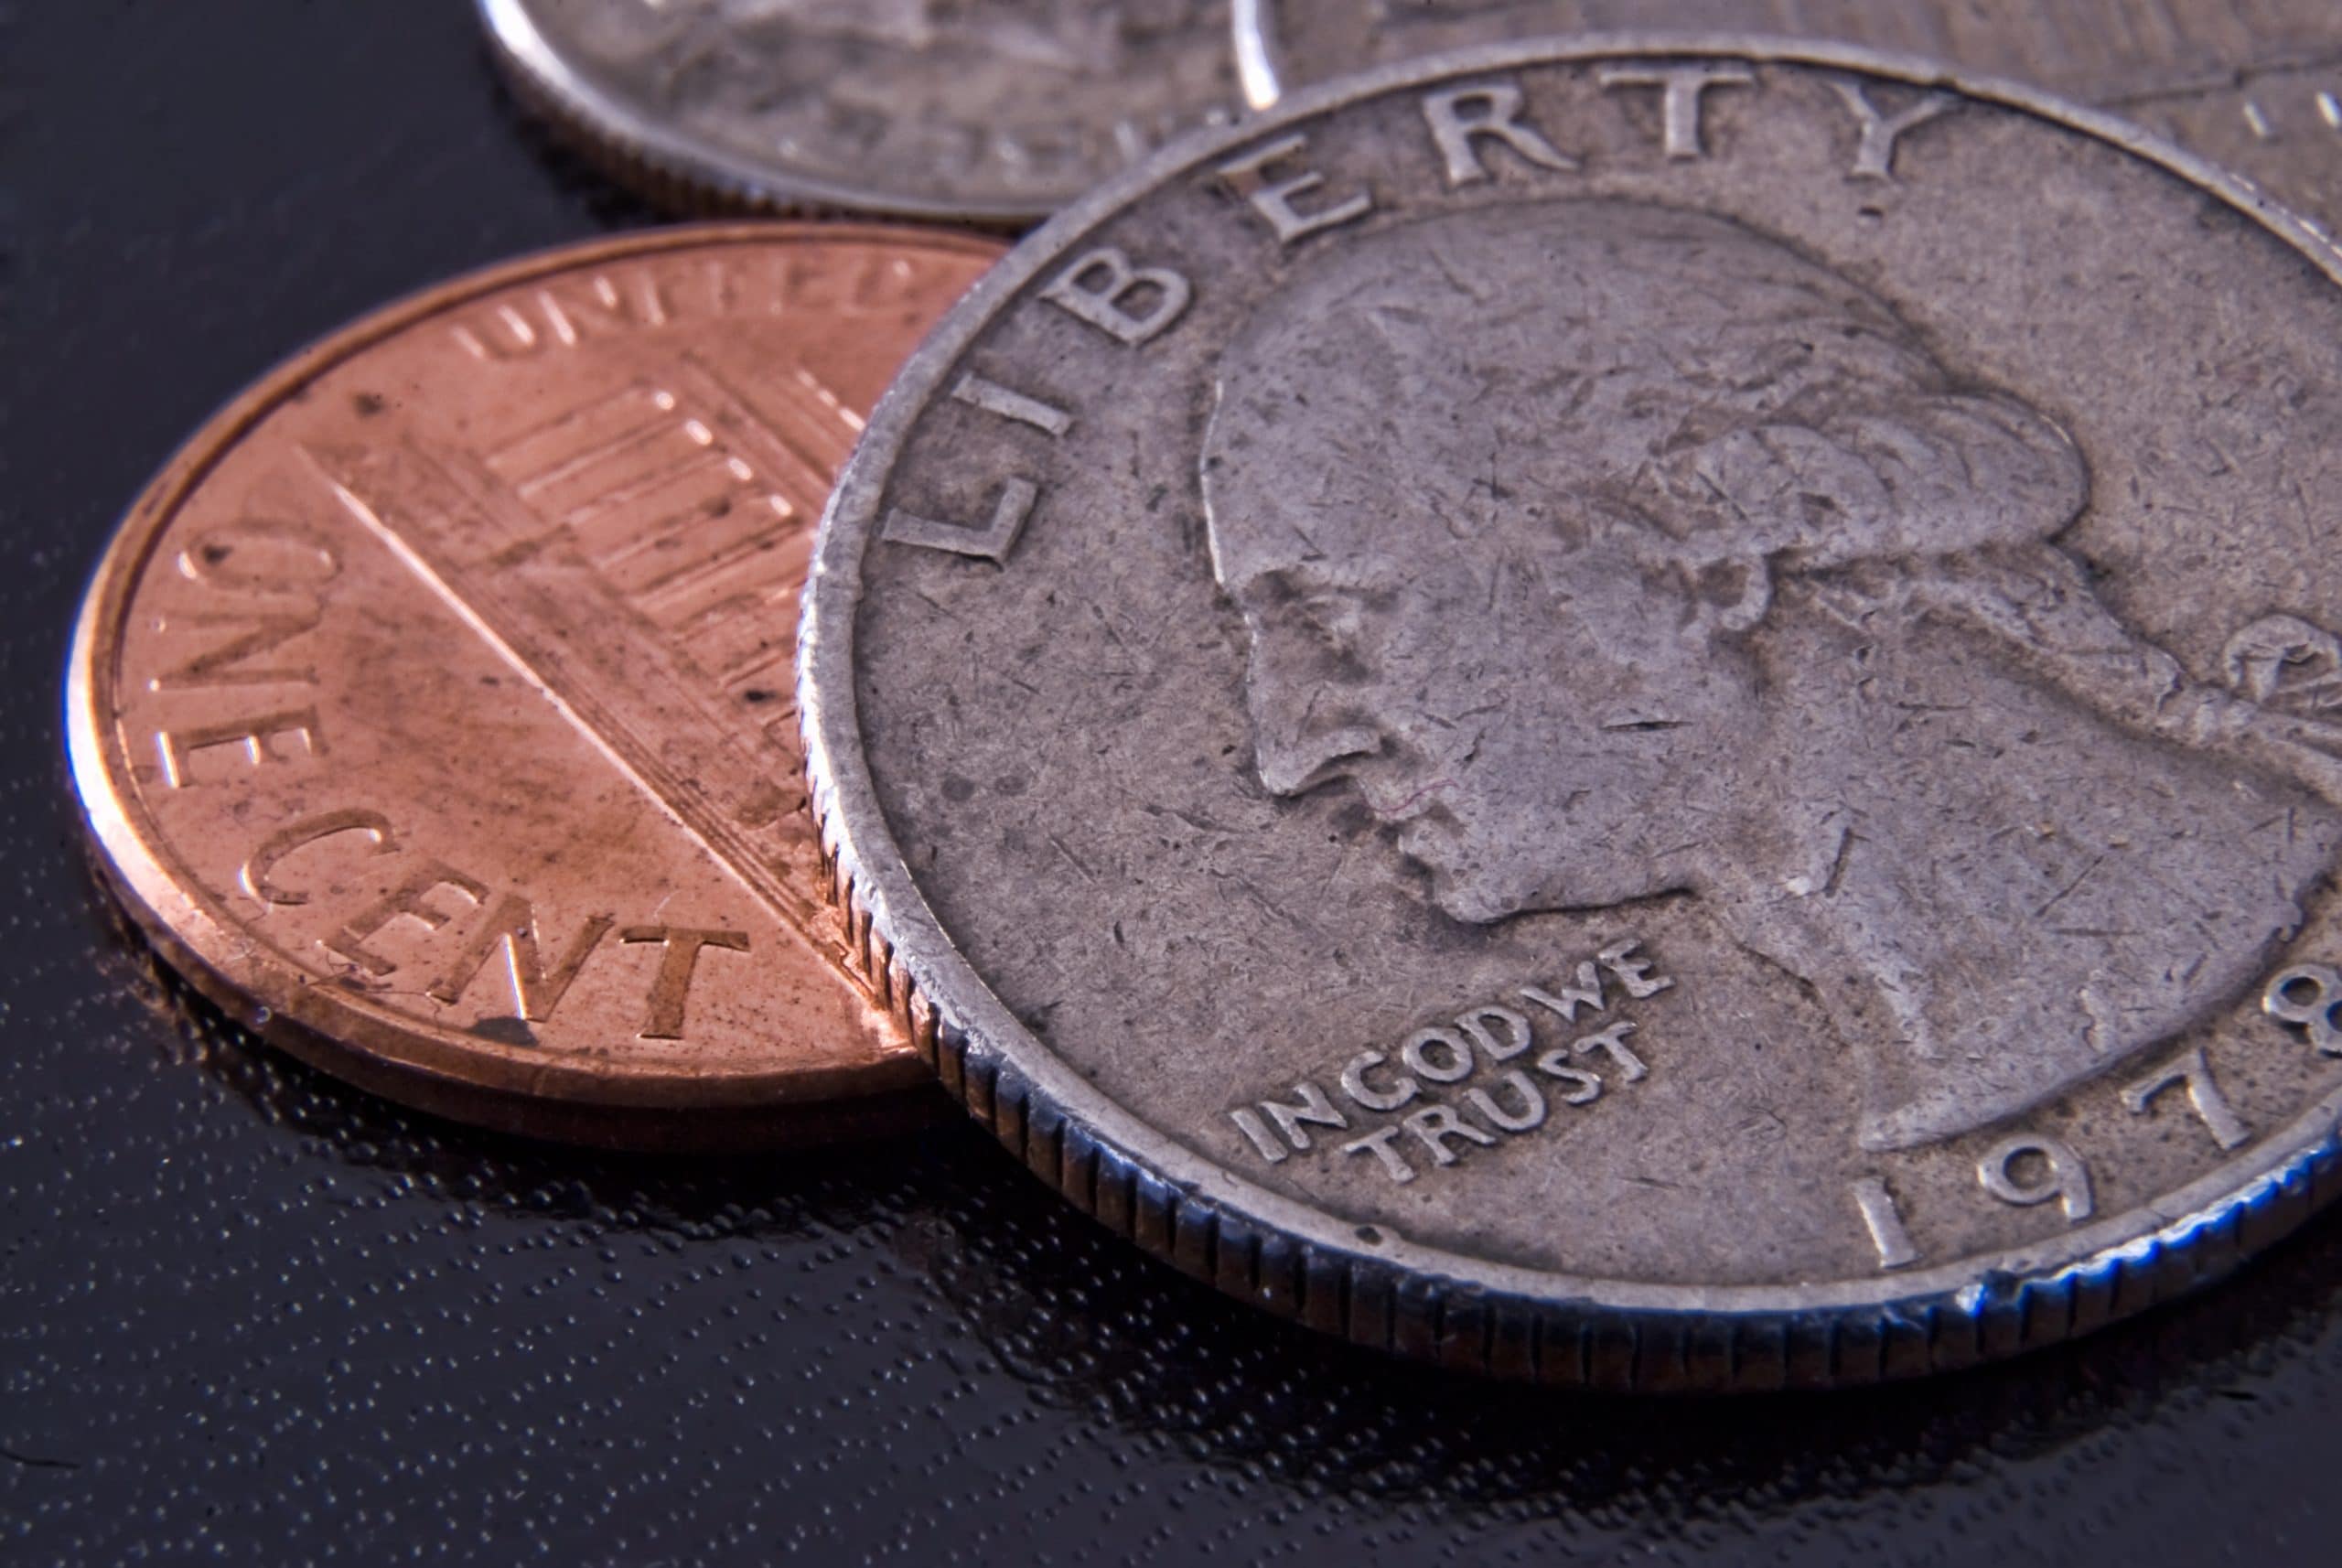 How to clean copper coins